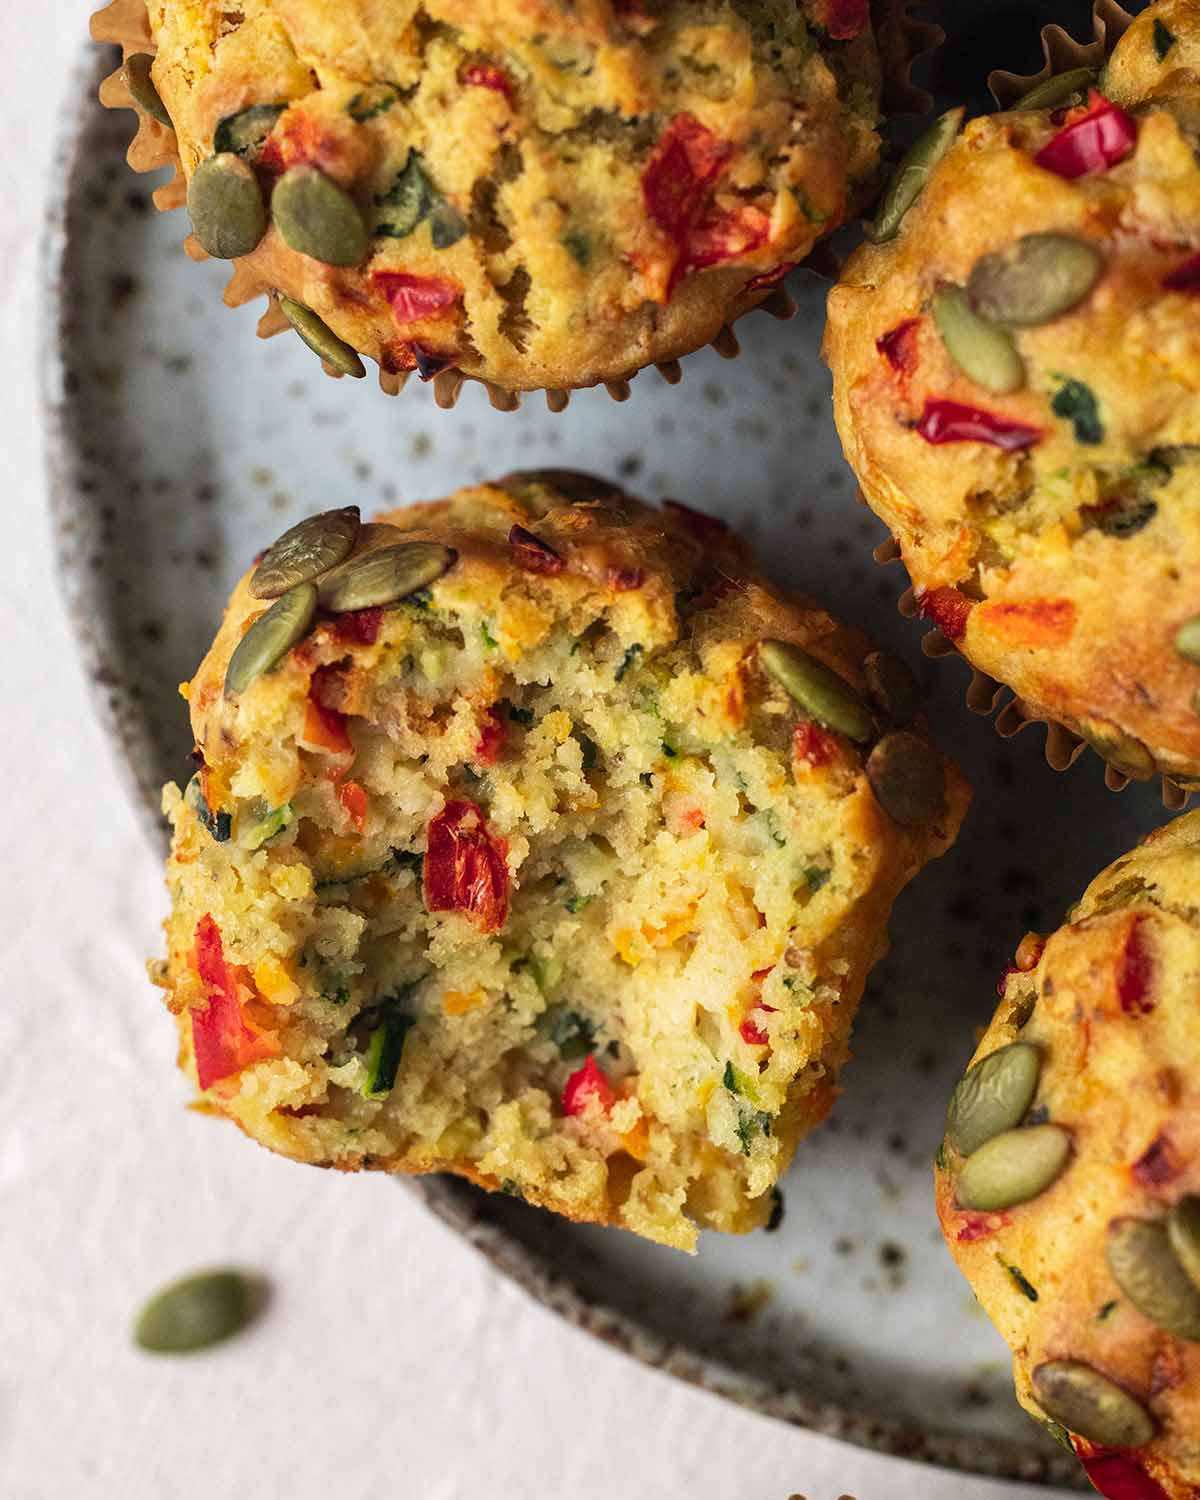 Close up of savoury muffins on plate with one muffin on its side with bite taken, showing fluffy texture.